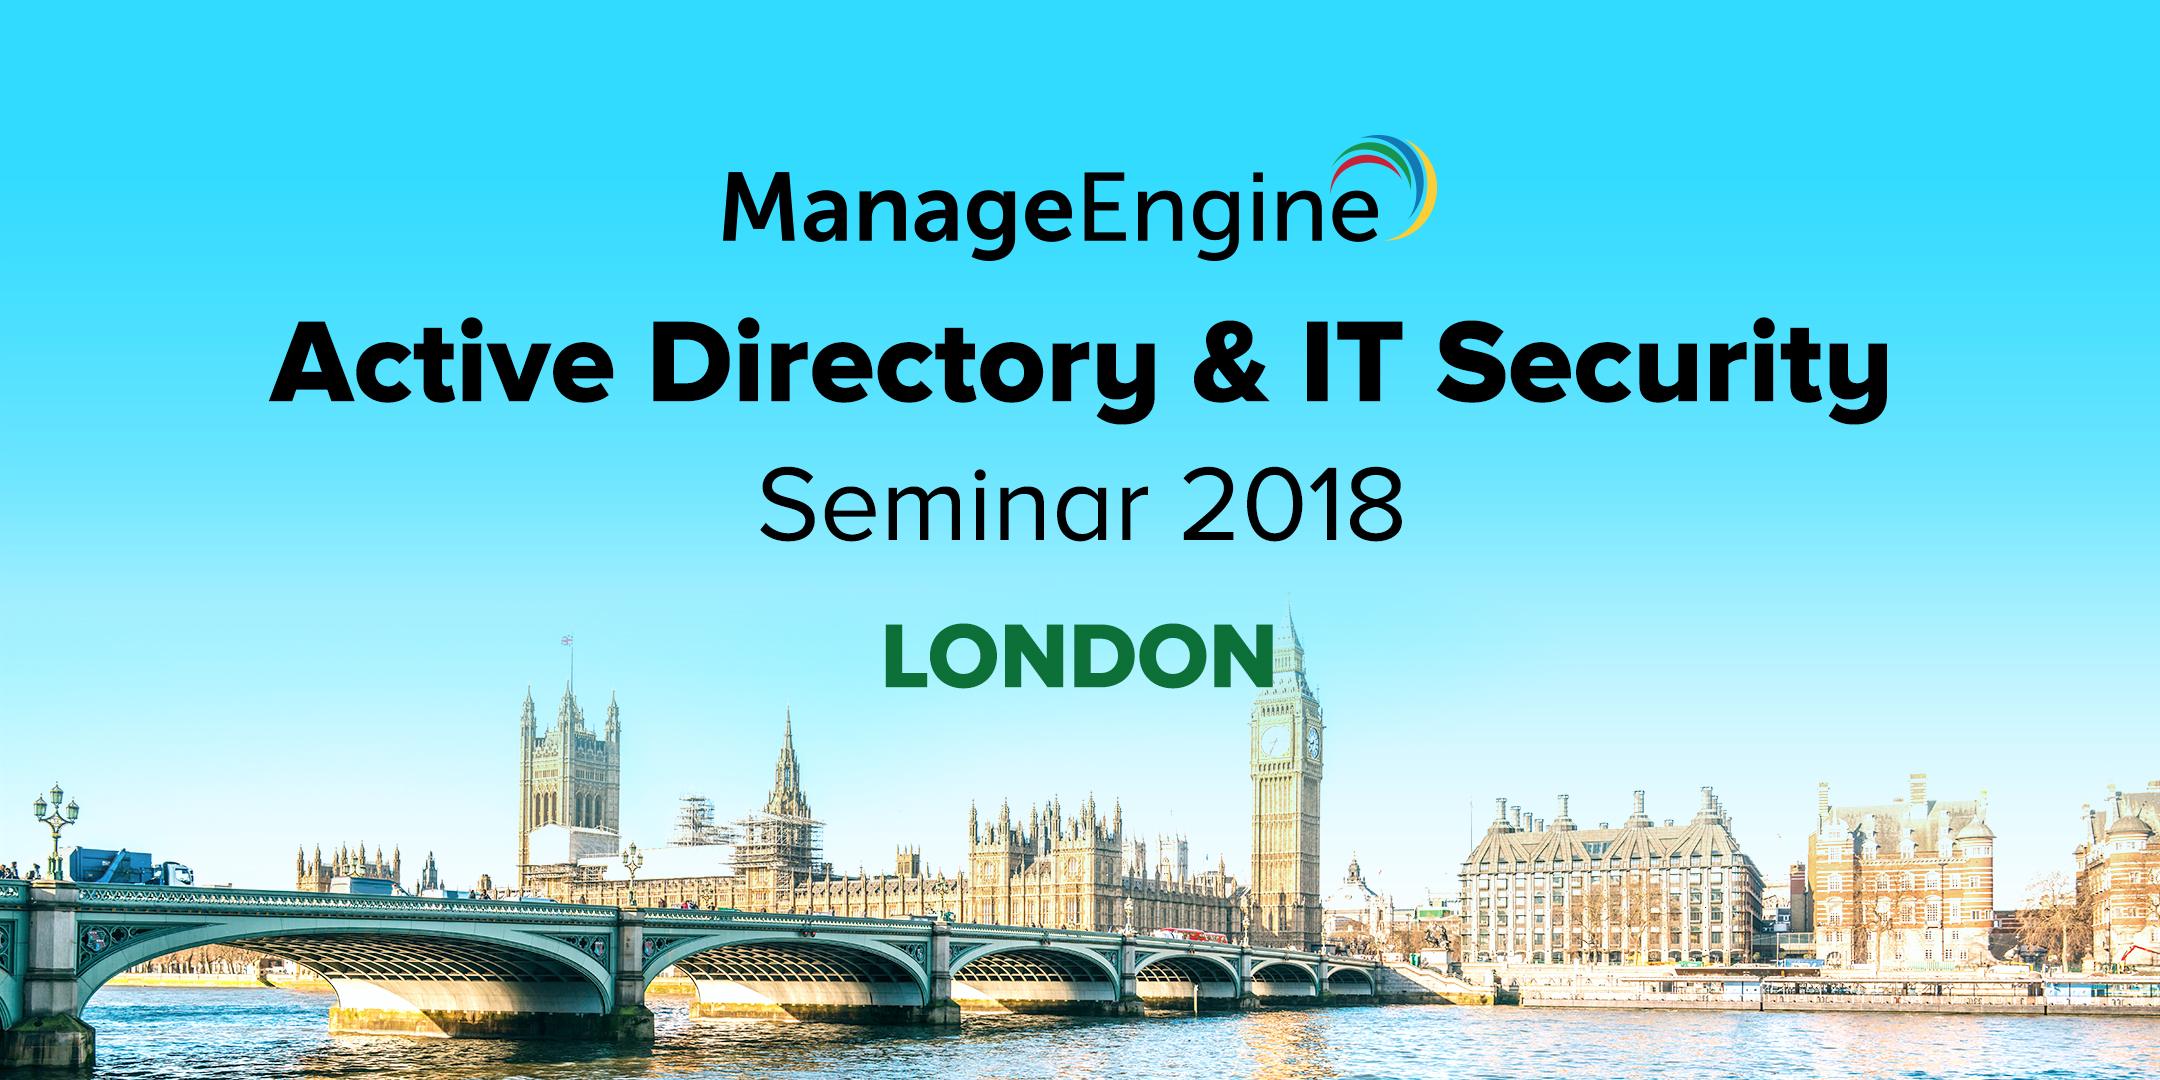 ManageEngine's Active Directory & IT Security seminar, London, United Kingdom